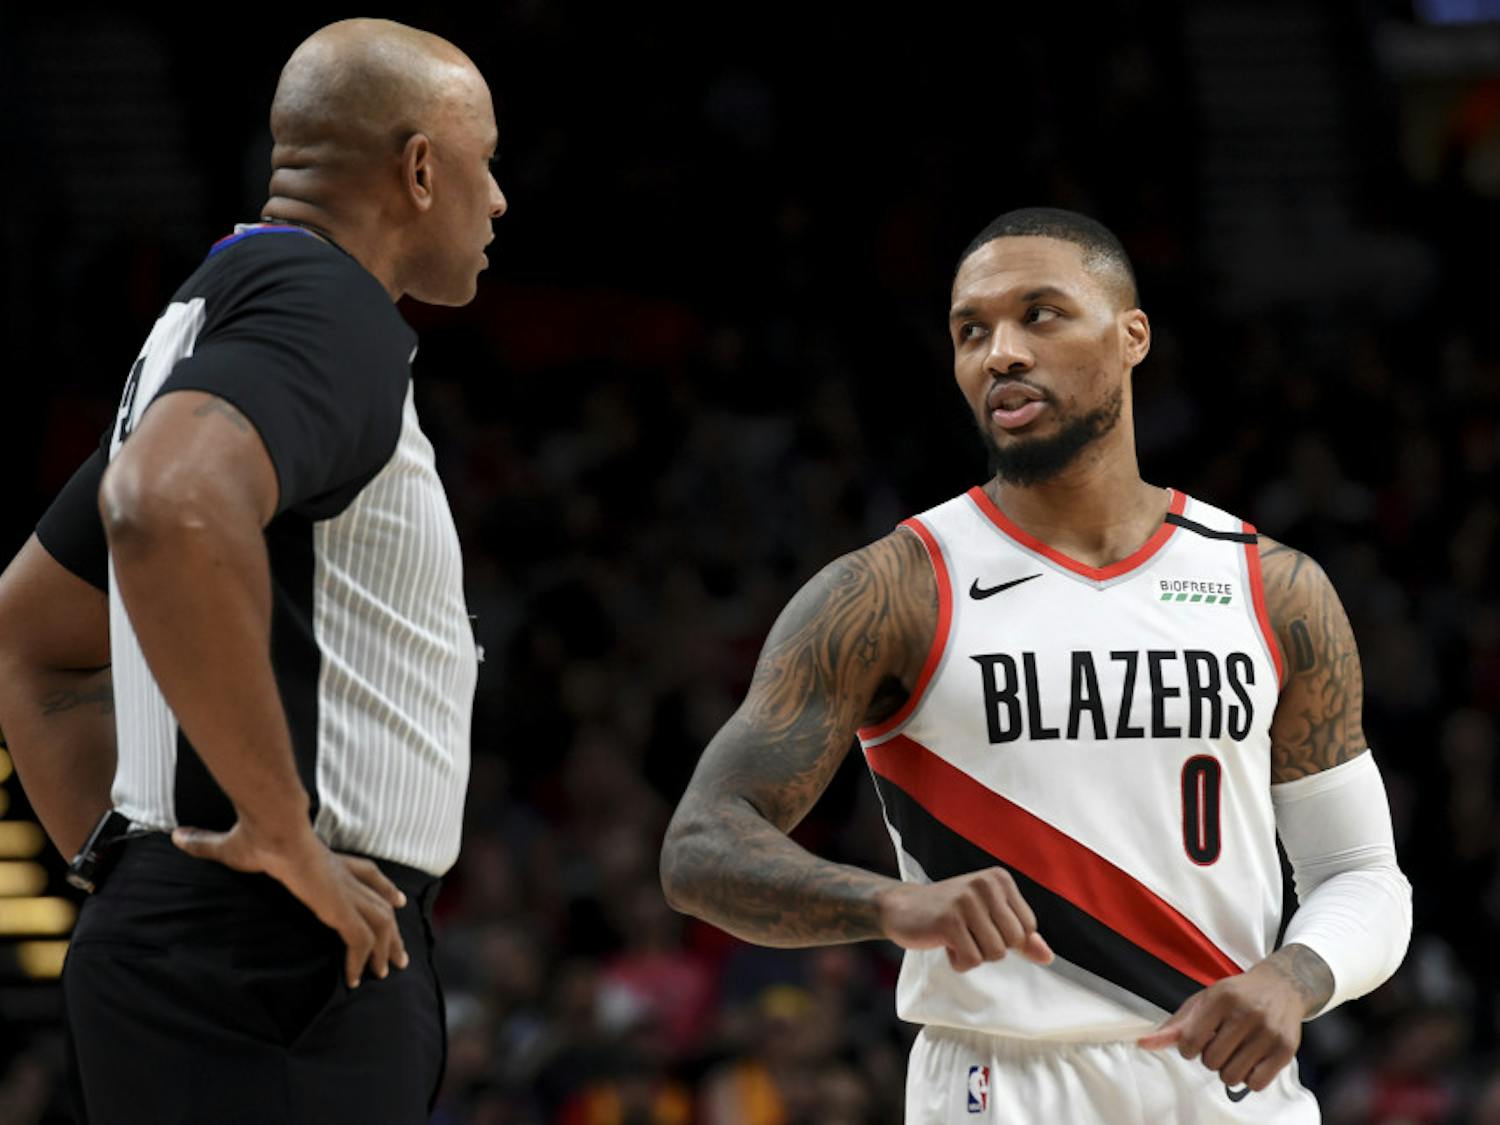 Portland Trail Blazers guard Damian Lillard, right, speaks with referee Kevin Cutler, left, during the first half of an NBA basketball game against the Utah Jazz in Portland, Ore., Saturday, Feb. 1, 2020. (AP Photo/Steve Dykes)